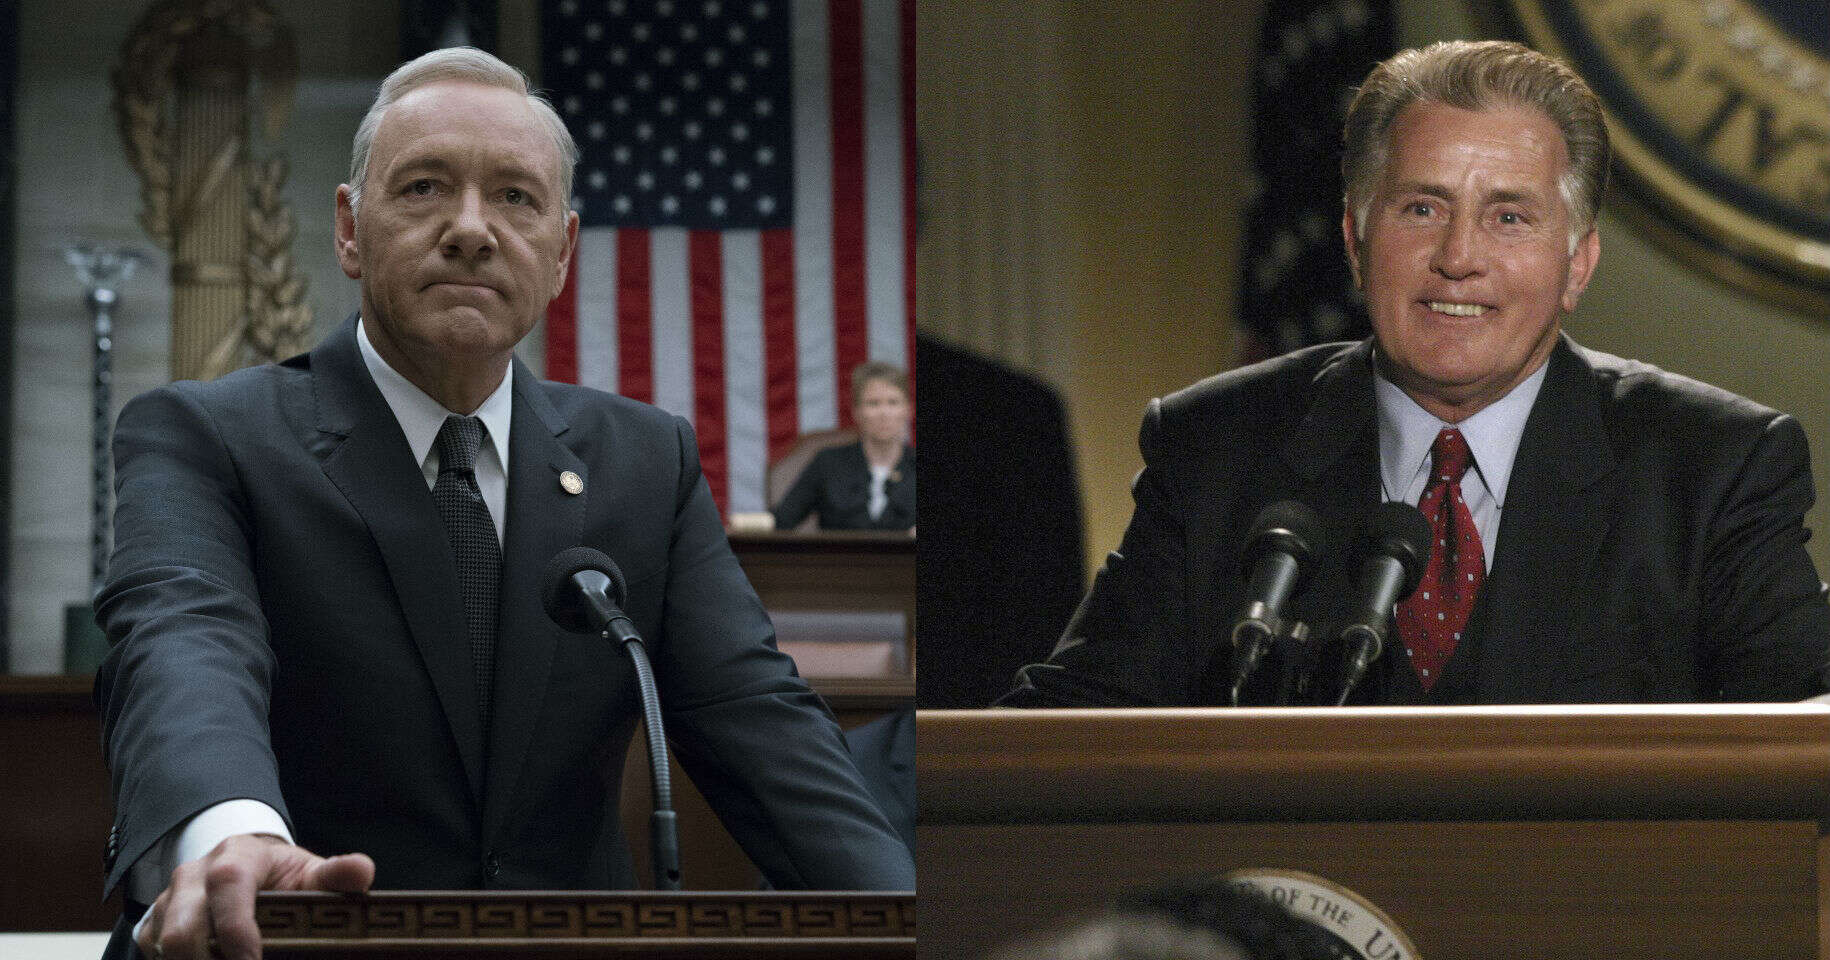 House of Cards vs. West Wing